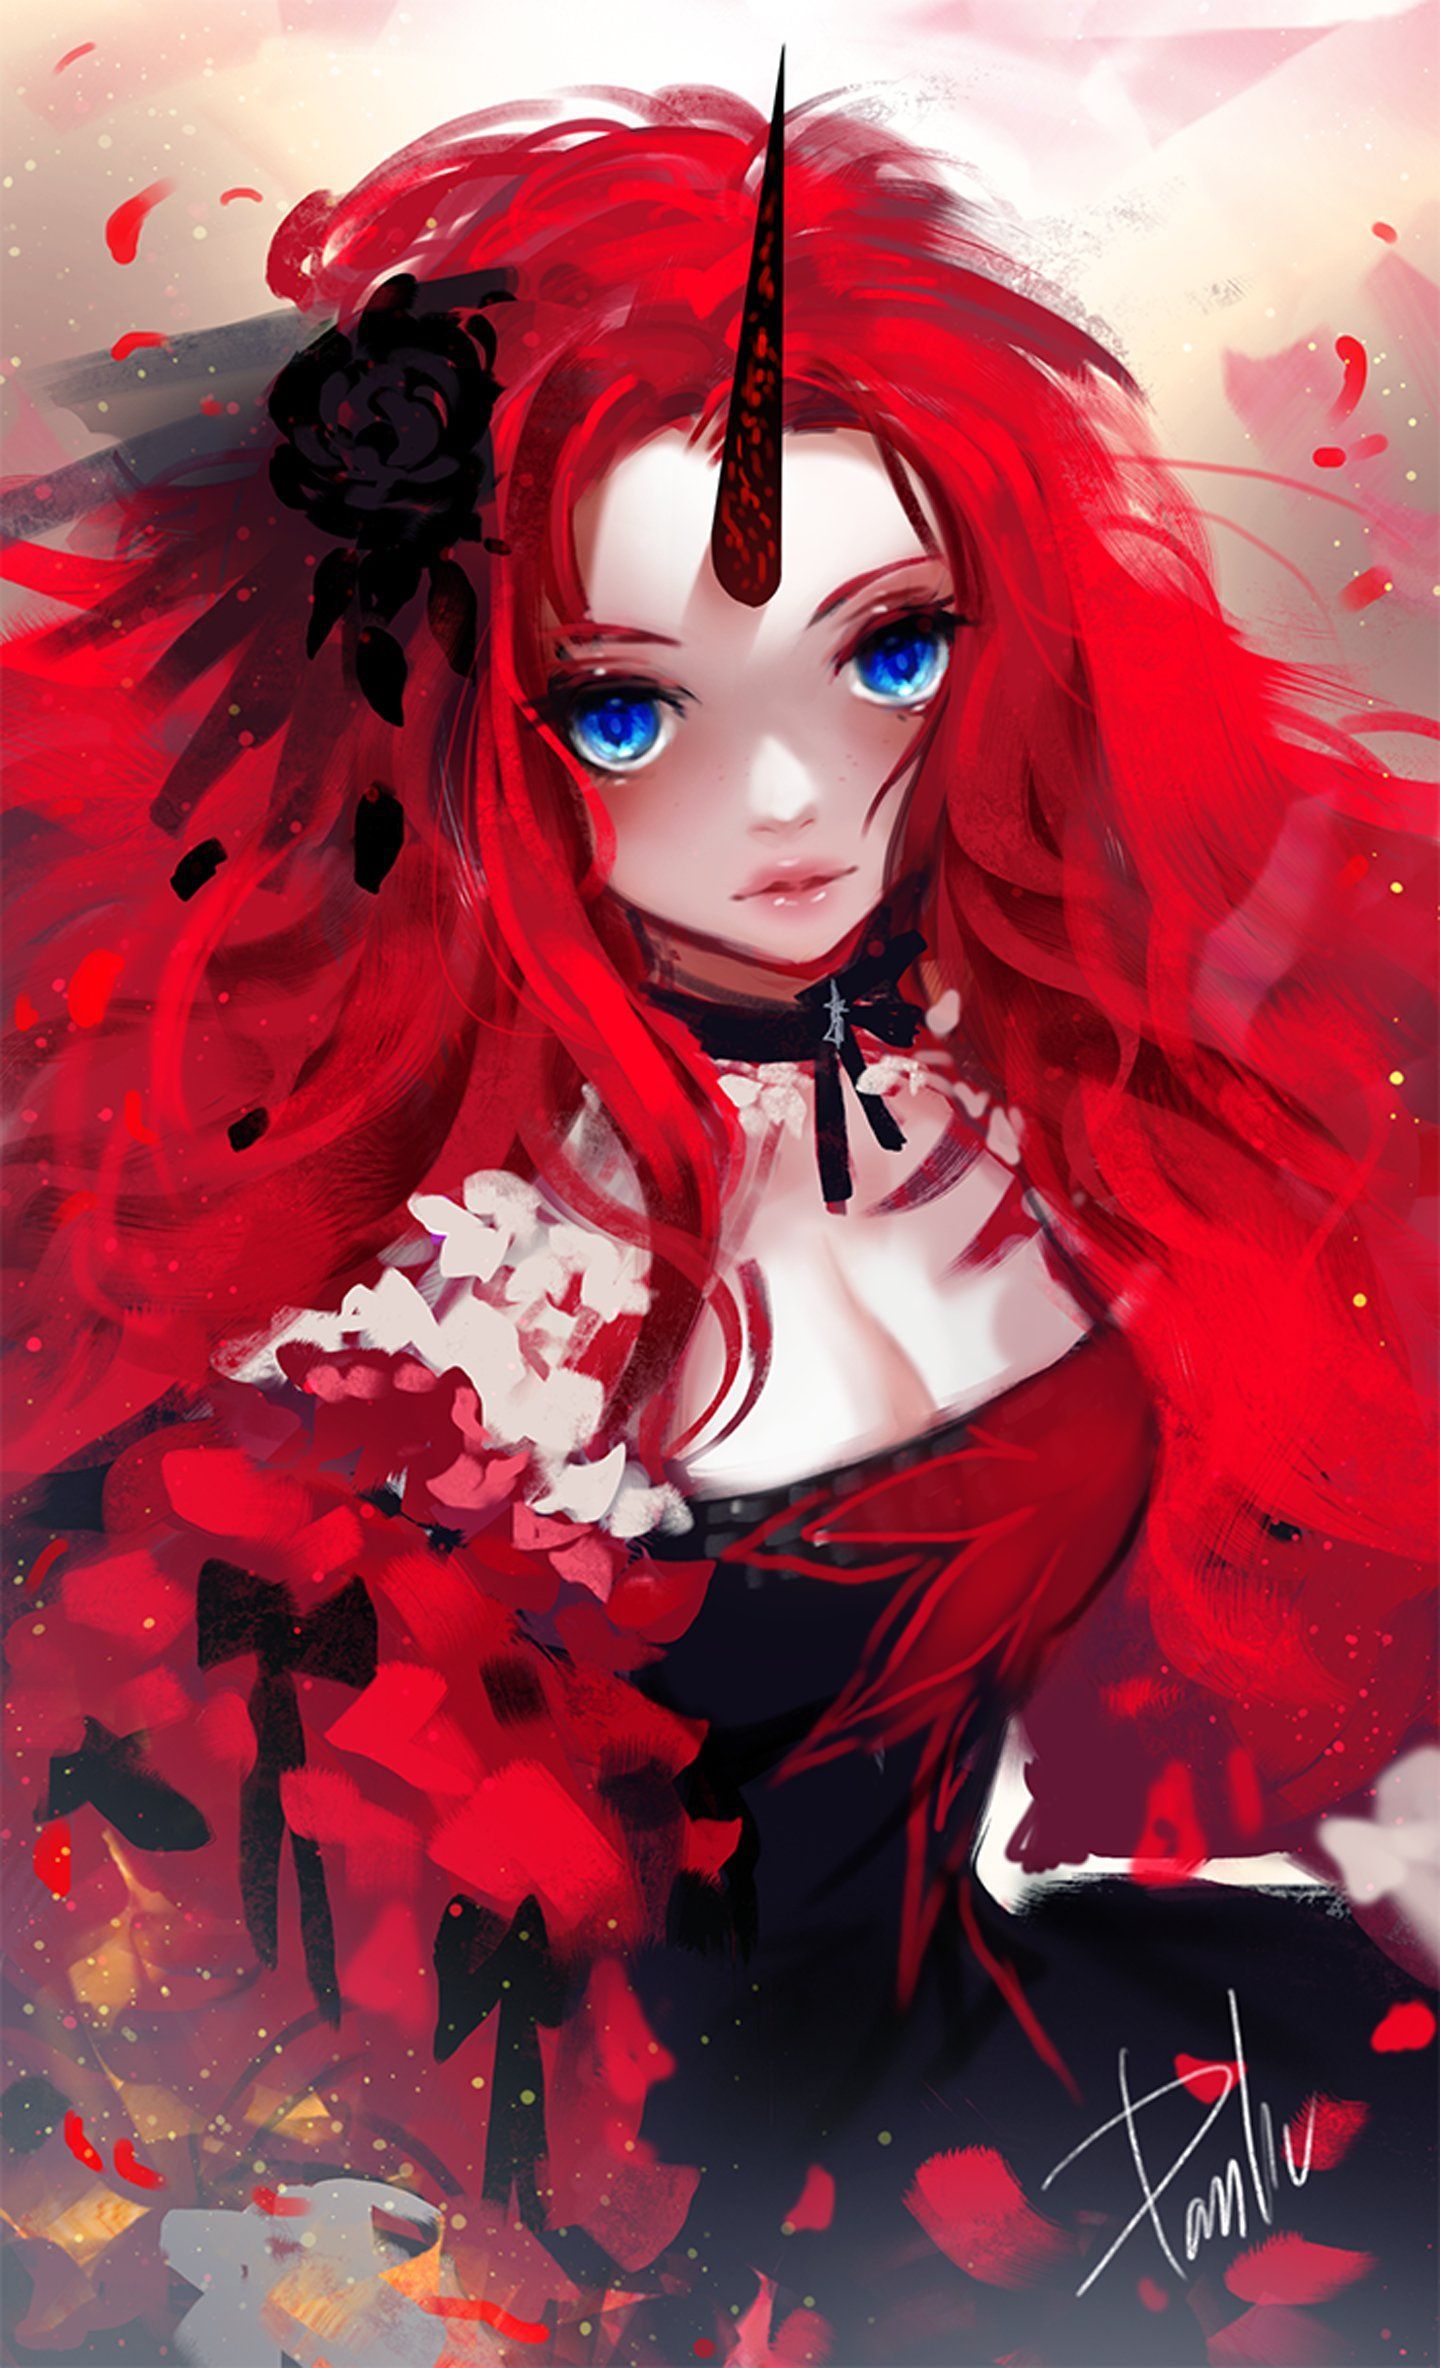 6,918 Red Haired Girl Anime Images, Stock Photos & Vectors | Shutterstock